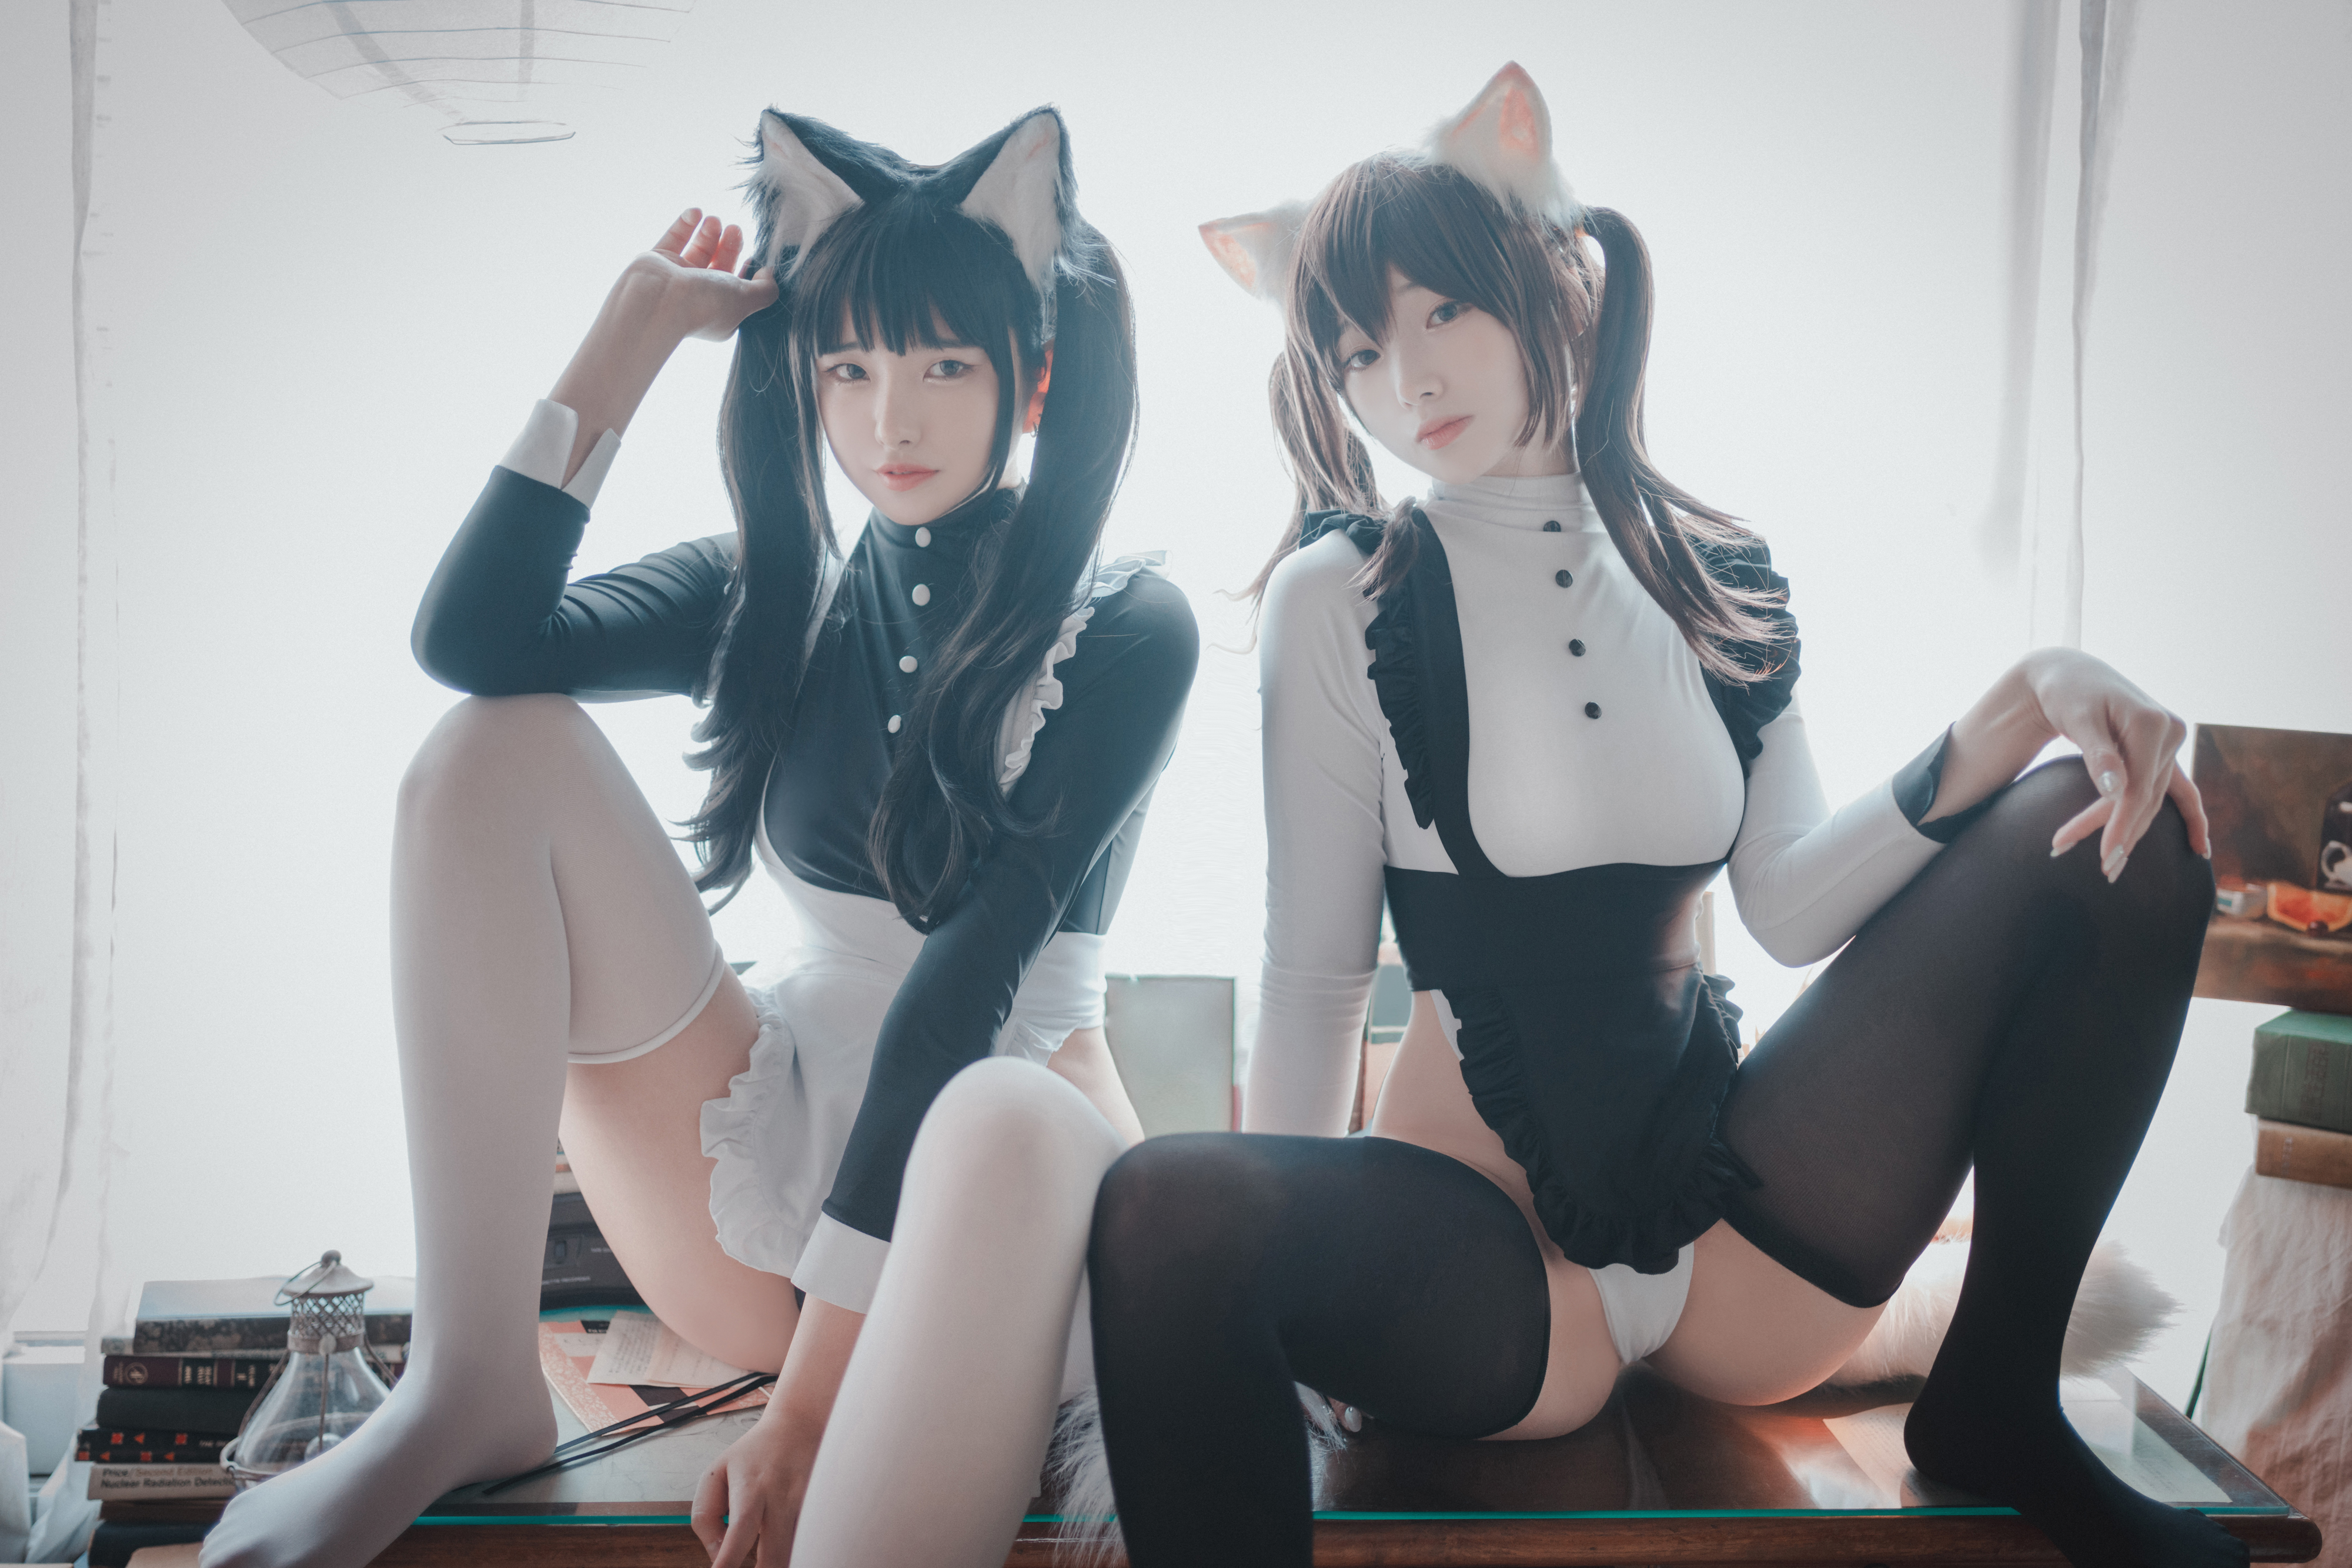 People 4000x2667 Bambi Jesuis DJAWA women model Asian cosplay maid maid outfit cat ears cat girl stockings indoors women indoors brunette twintails desk books silk Sonson white stockings black stockings